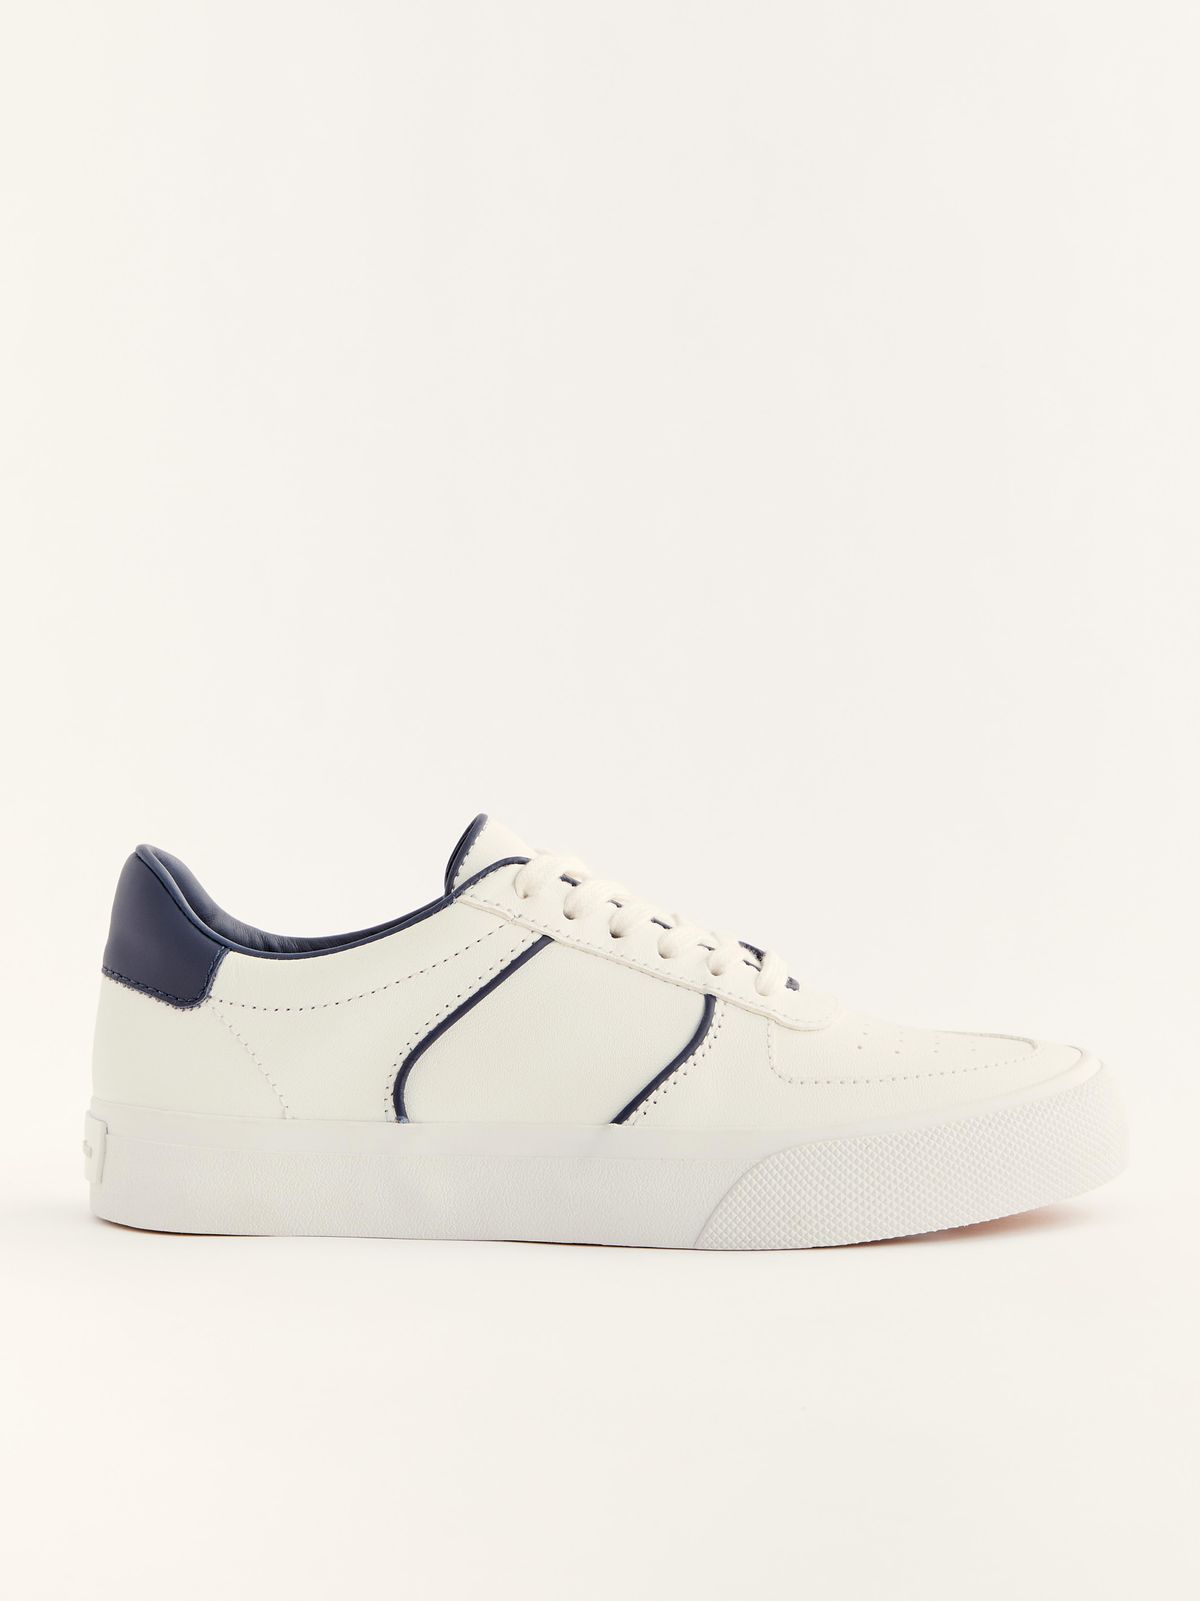 Harlow Leather Sneaker in White / Midnight